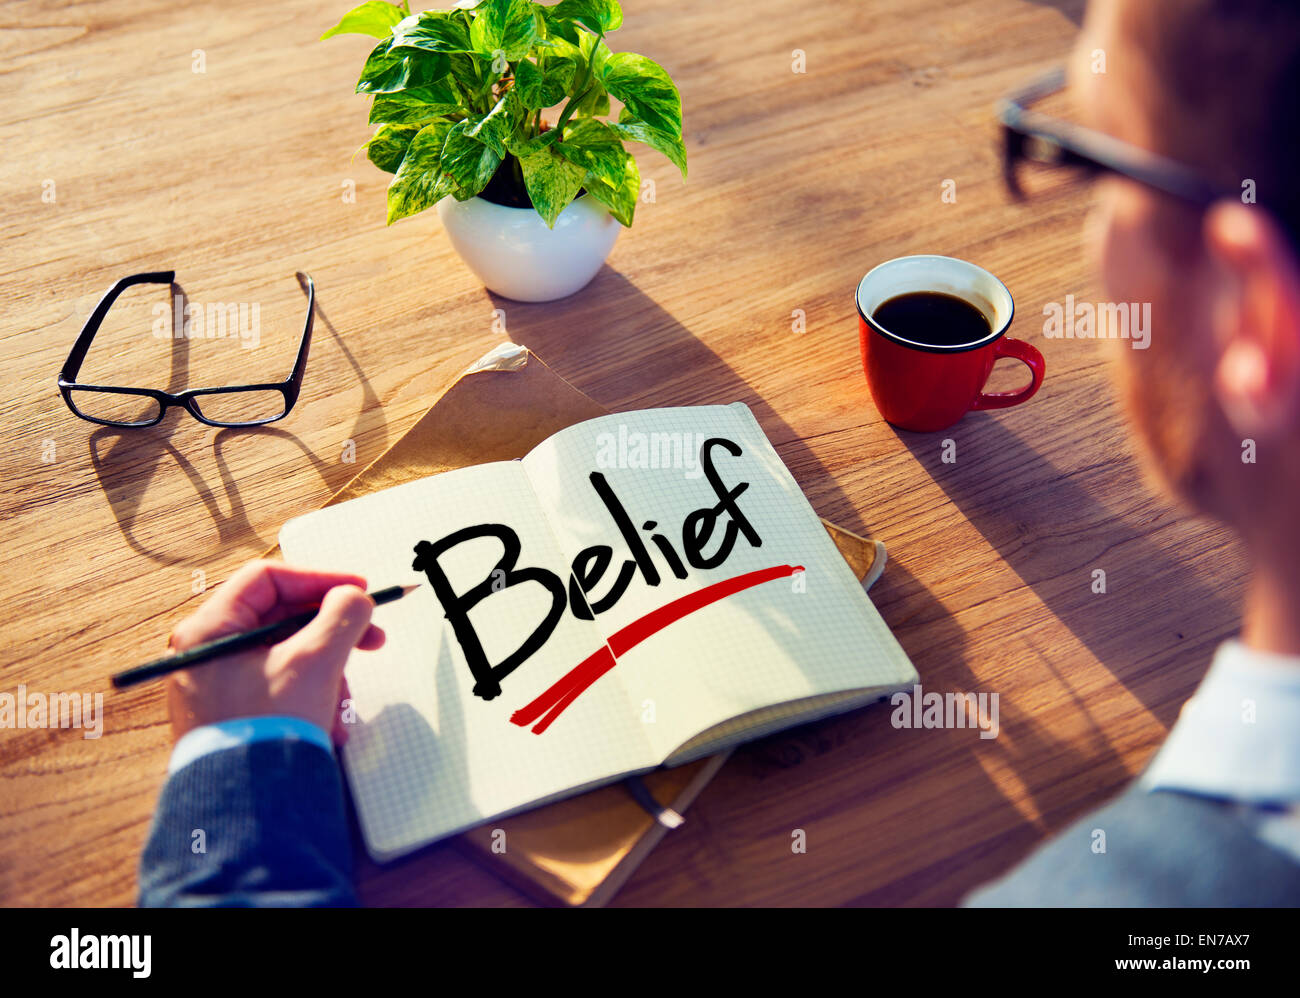 Businessman Brainstorming About Belief Stock Photo